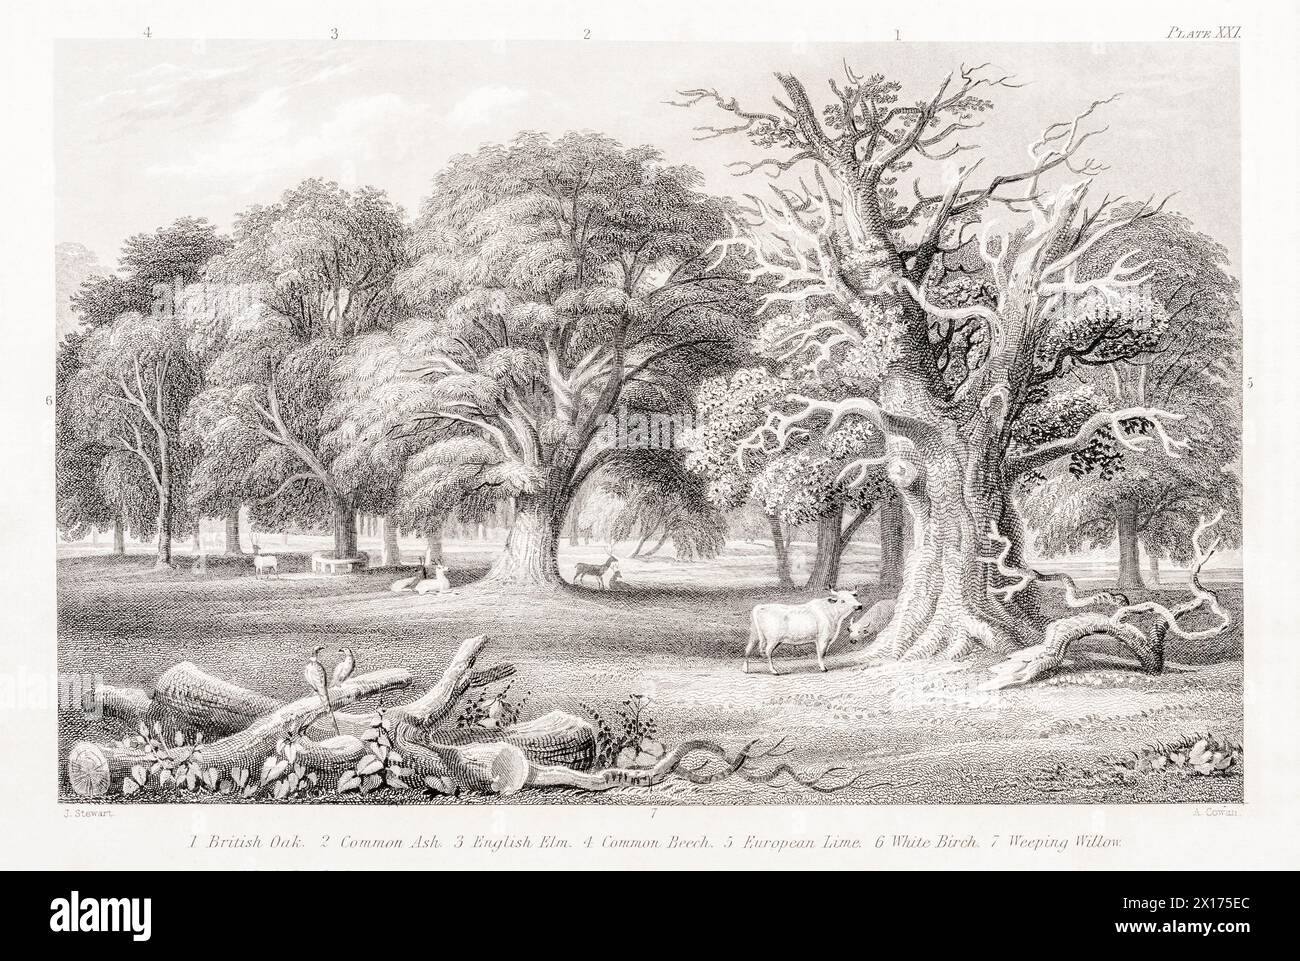 1872 Victorian botanical picture in William Rhind: Timber Trees. Oak, Ash, English Elm, Beech Lime, Birch & Willow shown. All European economic trees. Stock Photo